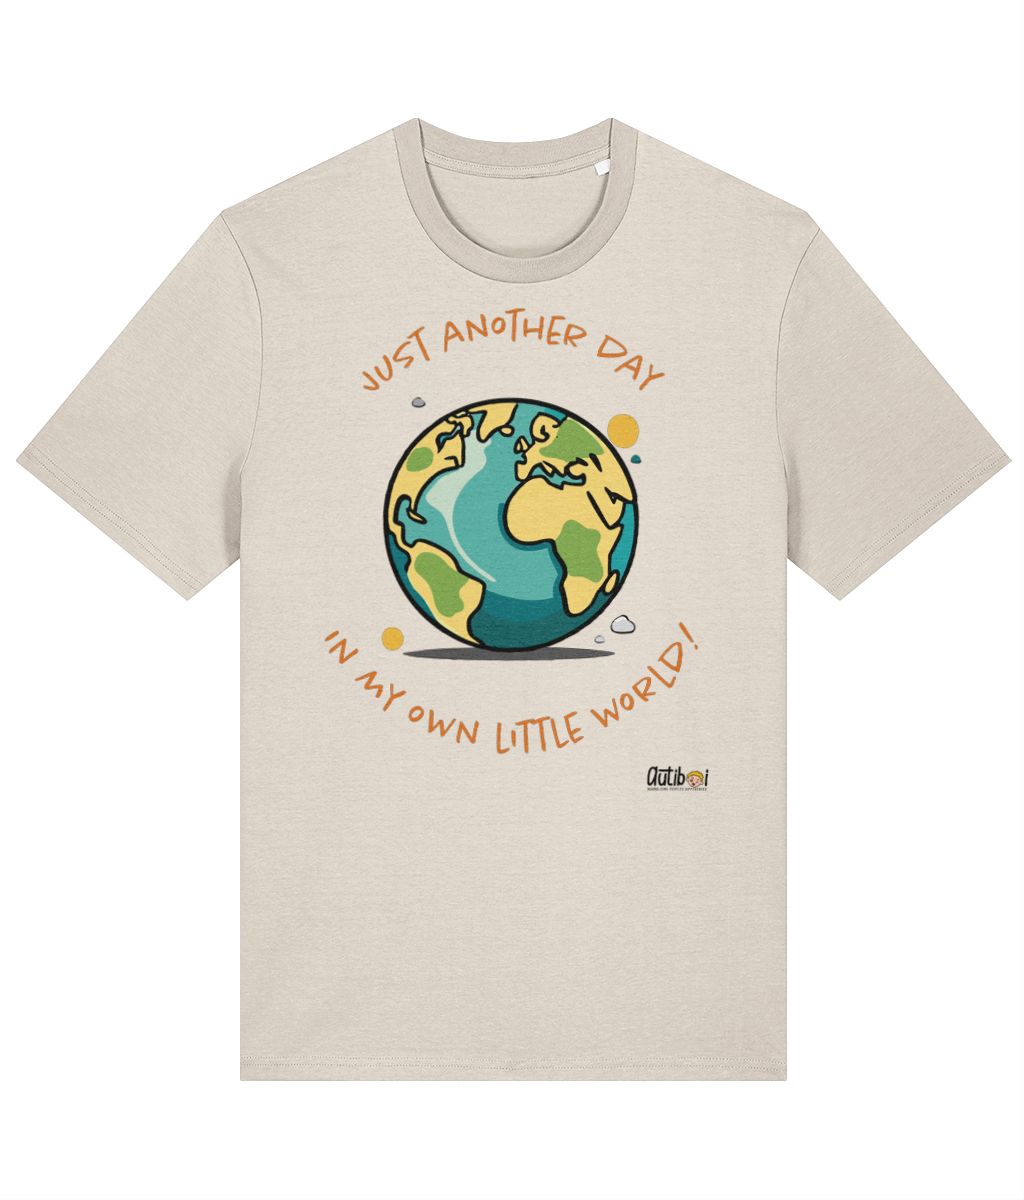 Just Another Day - Adult Tee